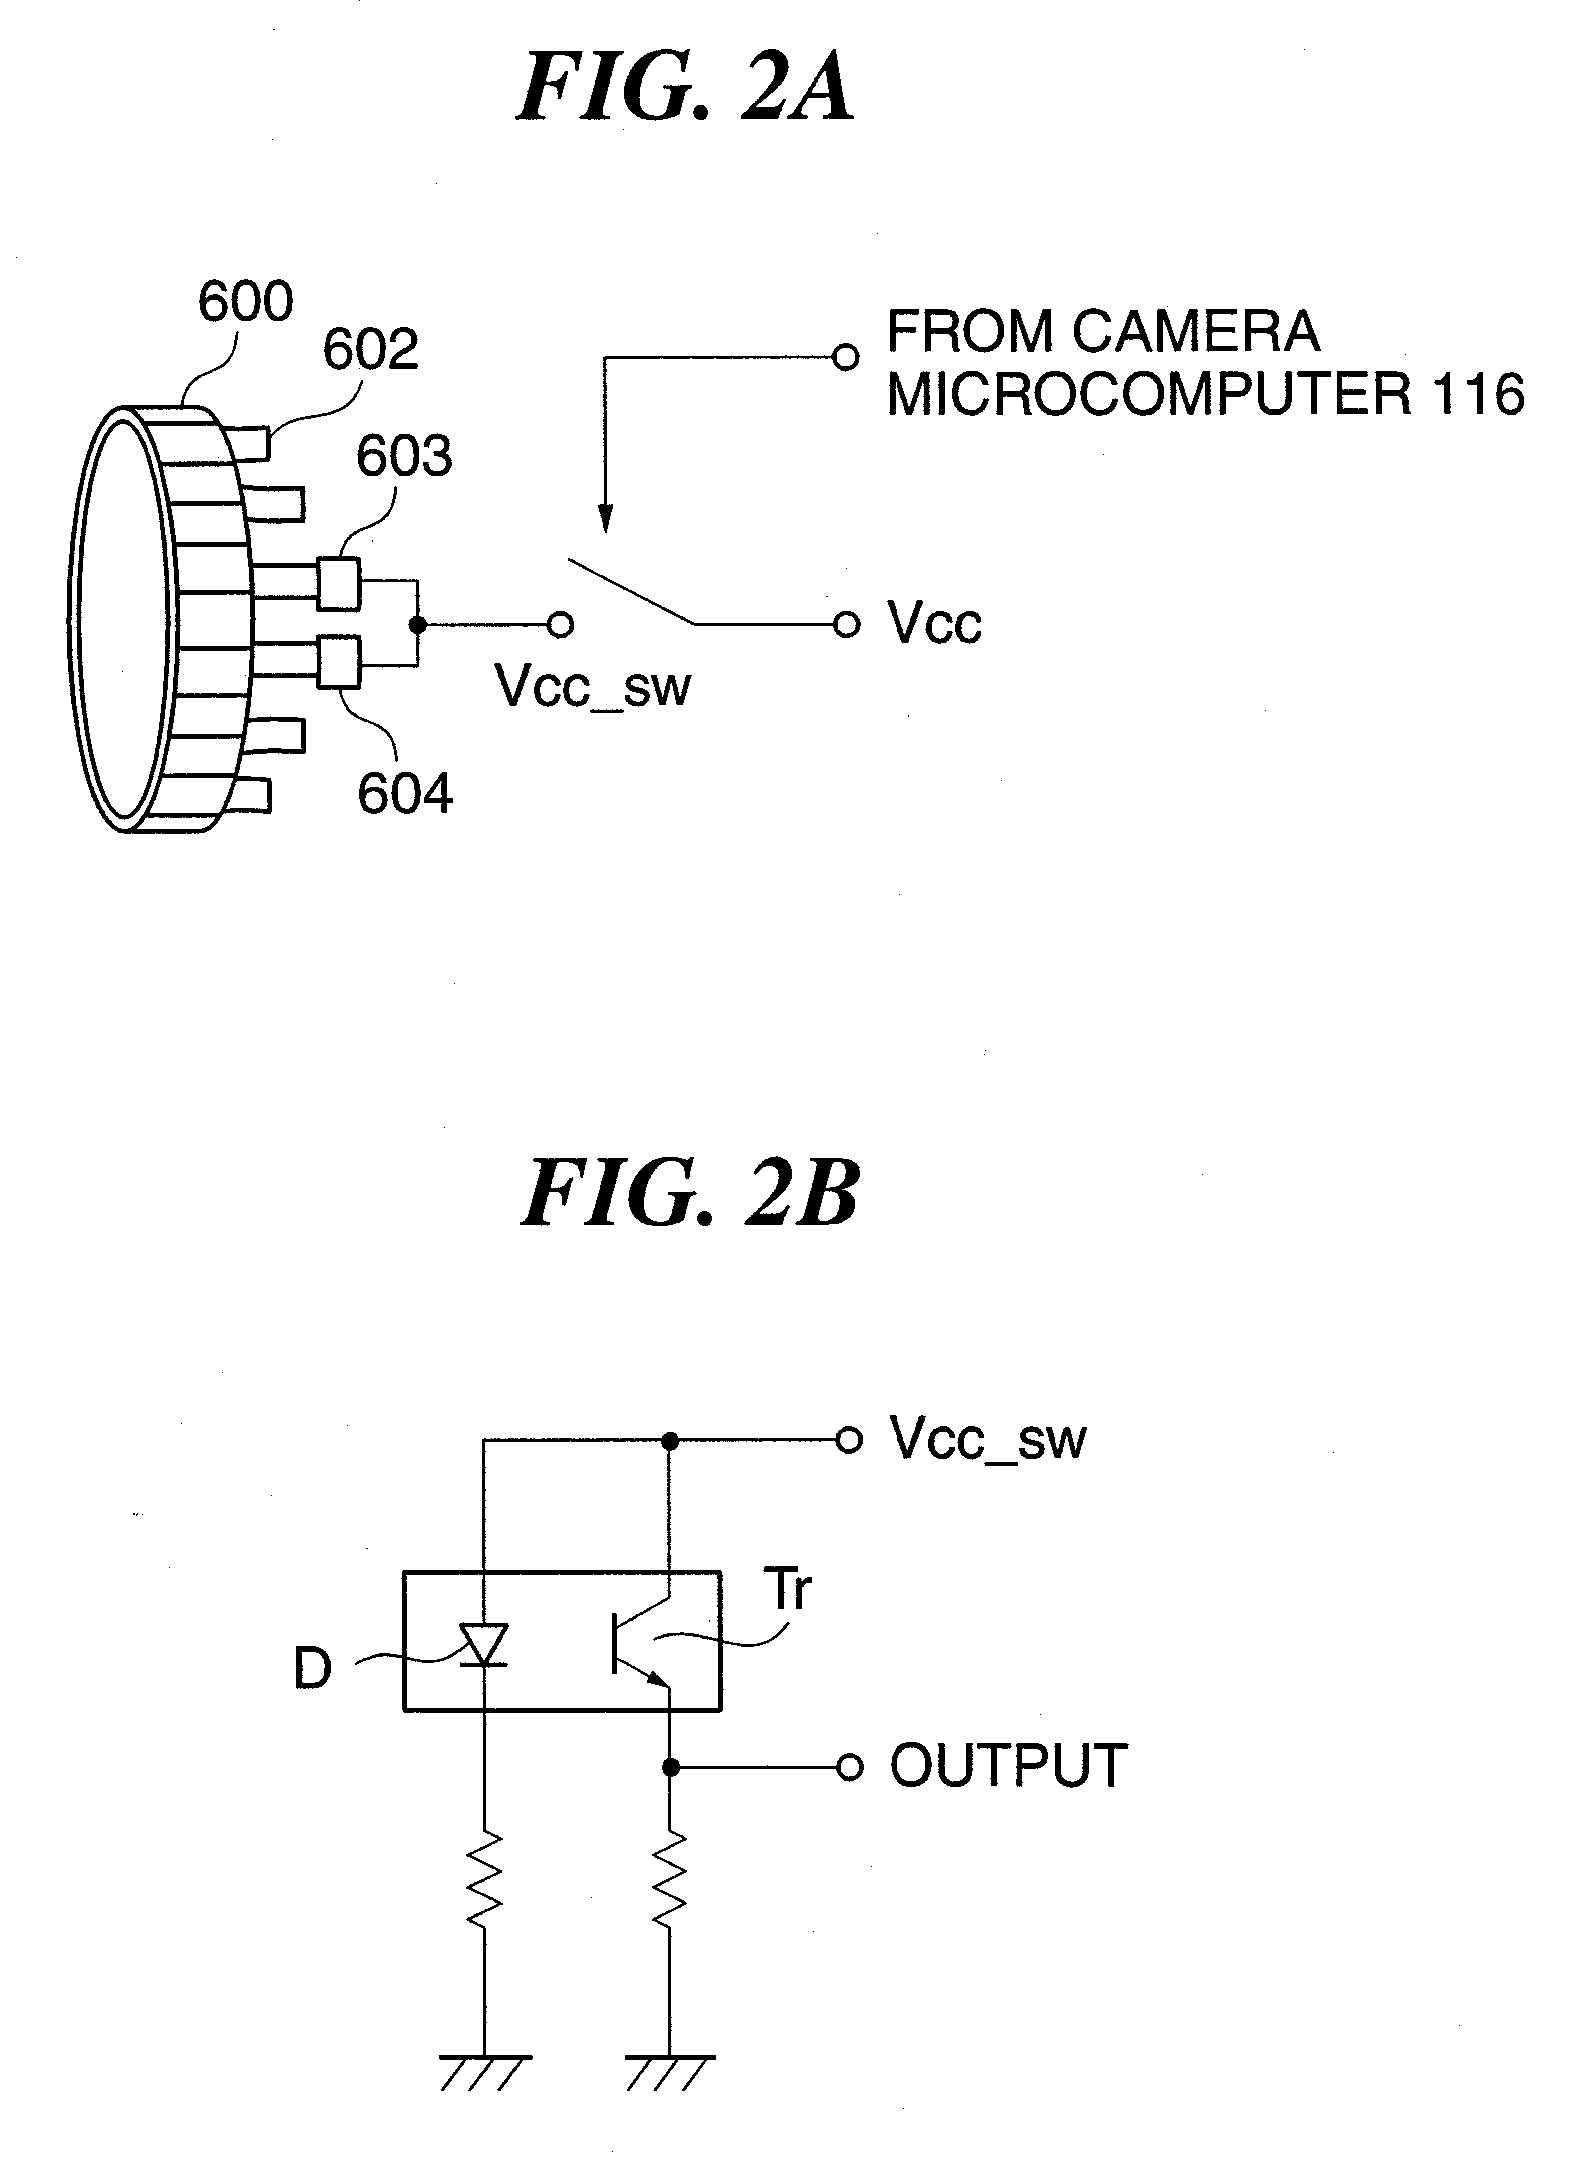 Image pickup apparatus, control method for the same, and program for implementing the control method